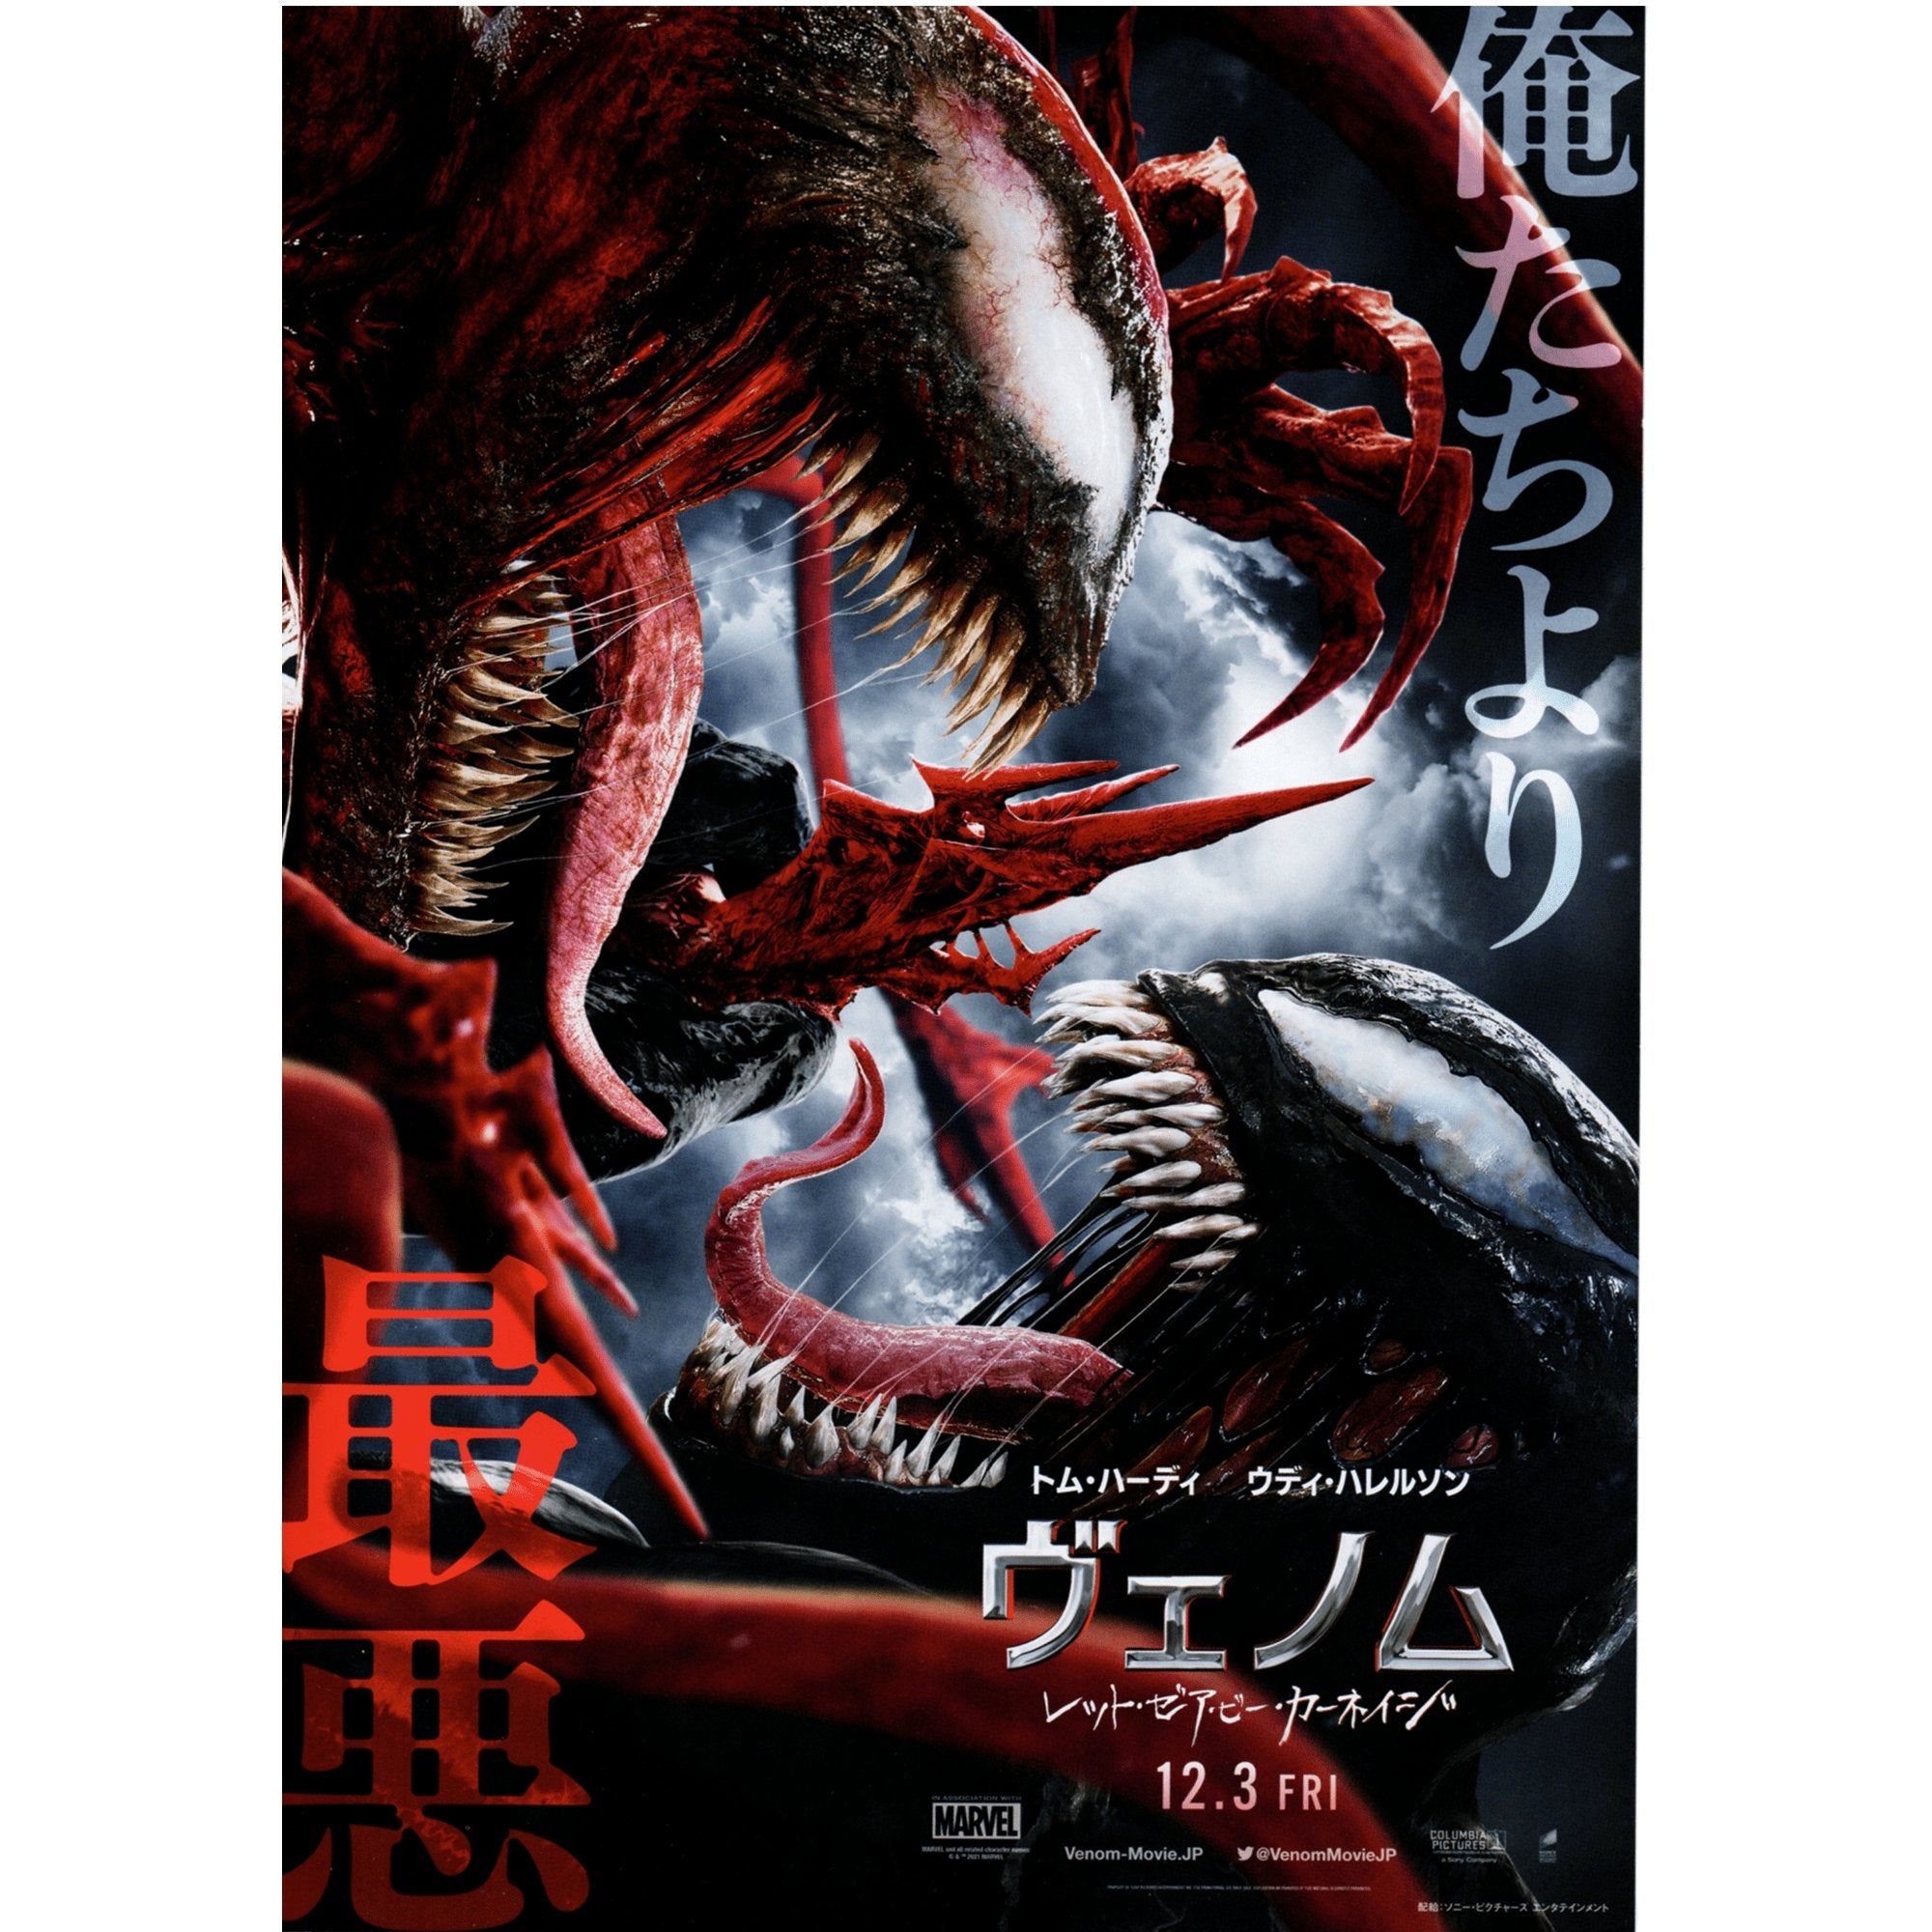 Venom: Let There Be Carnage, Marvel Movies